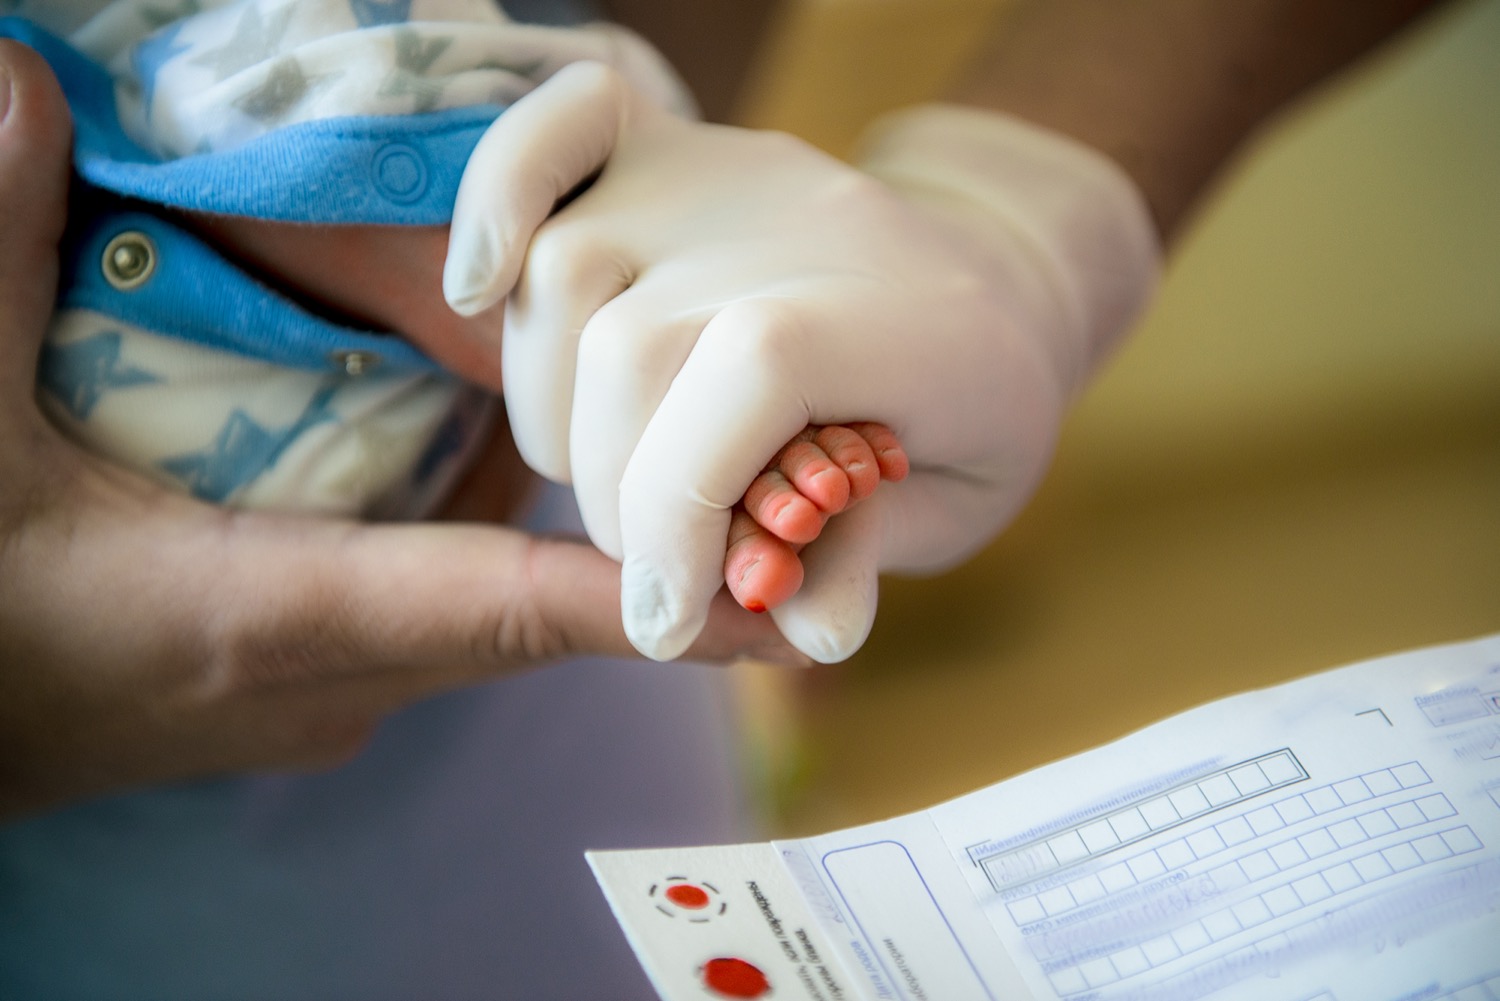 a medical gloved hand holding an infant's tiny foot, there's a small prick on the big toe, with some blood coming out so it can be caught on a blood test card held beneath it